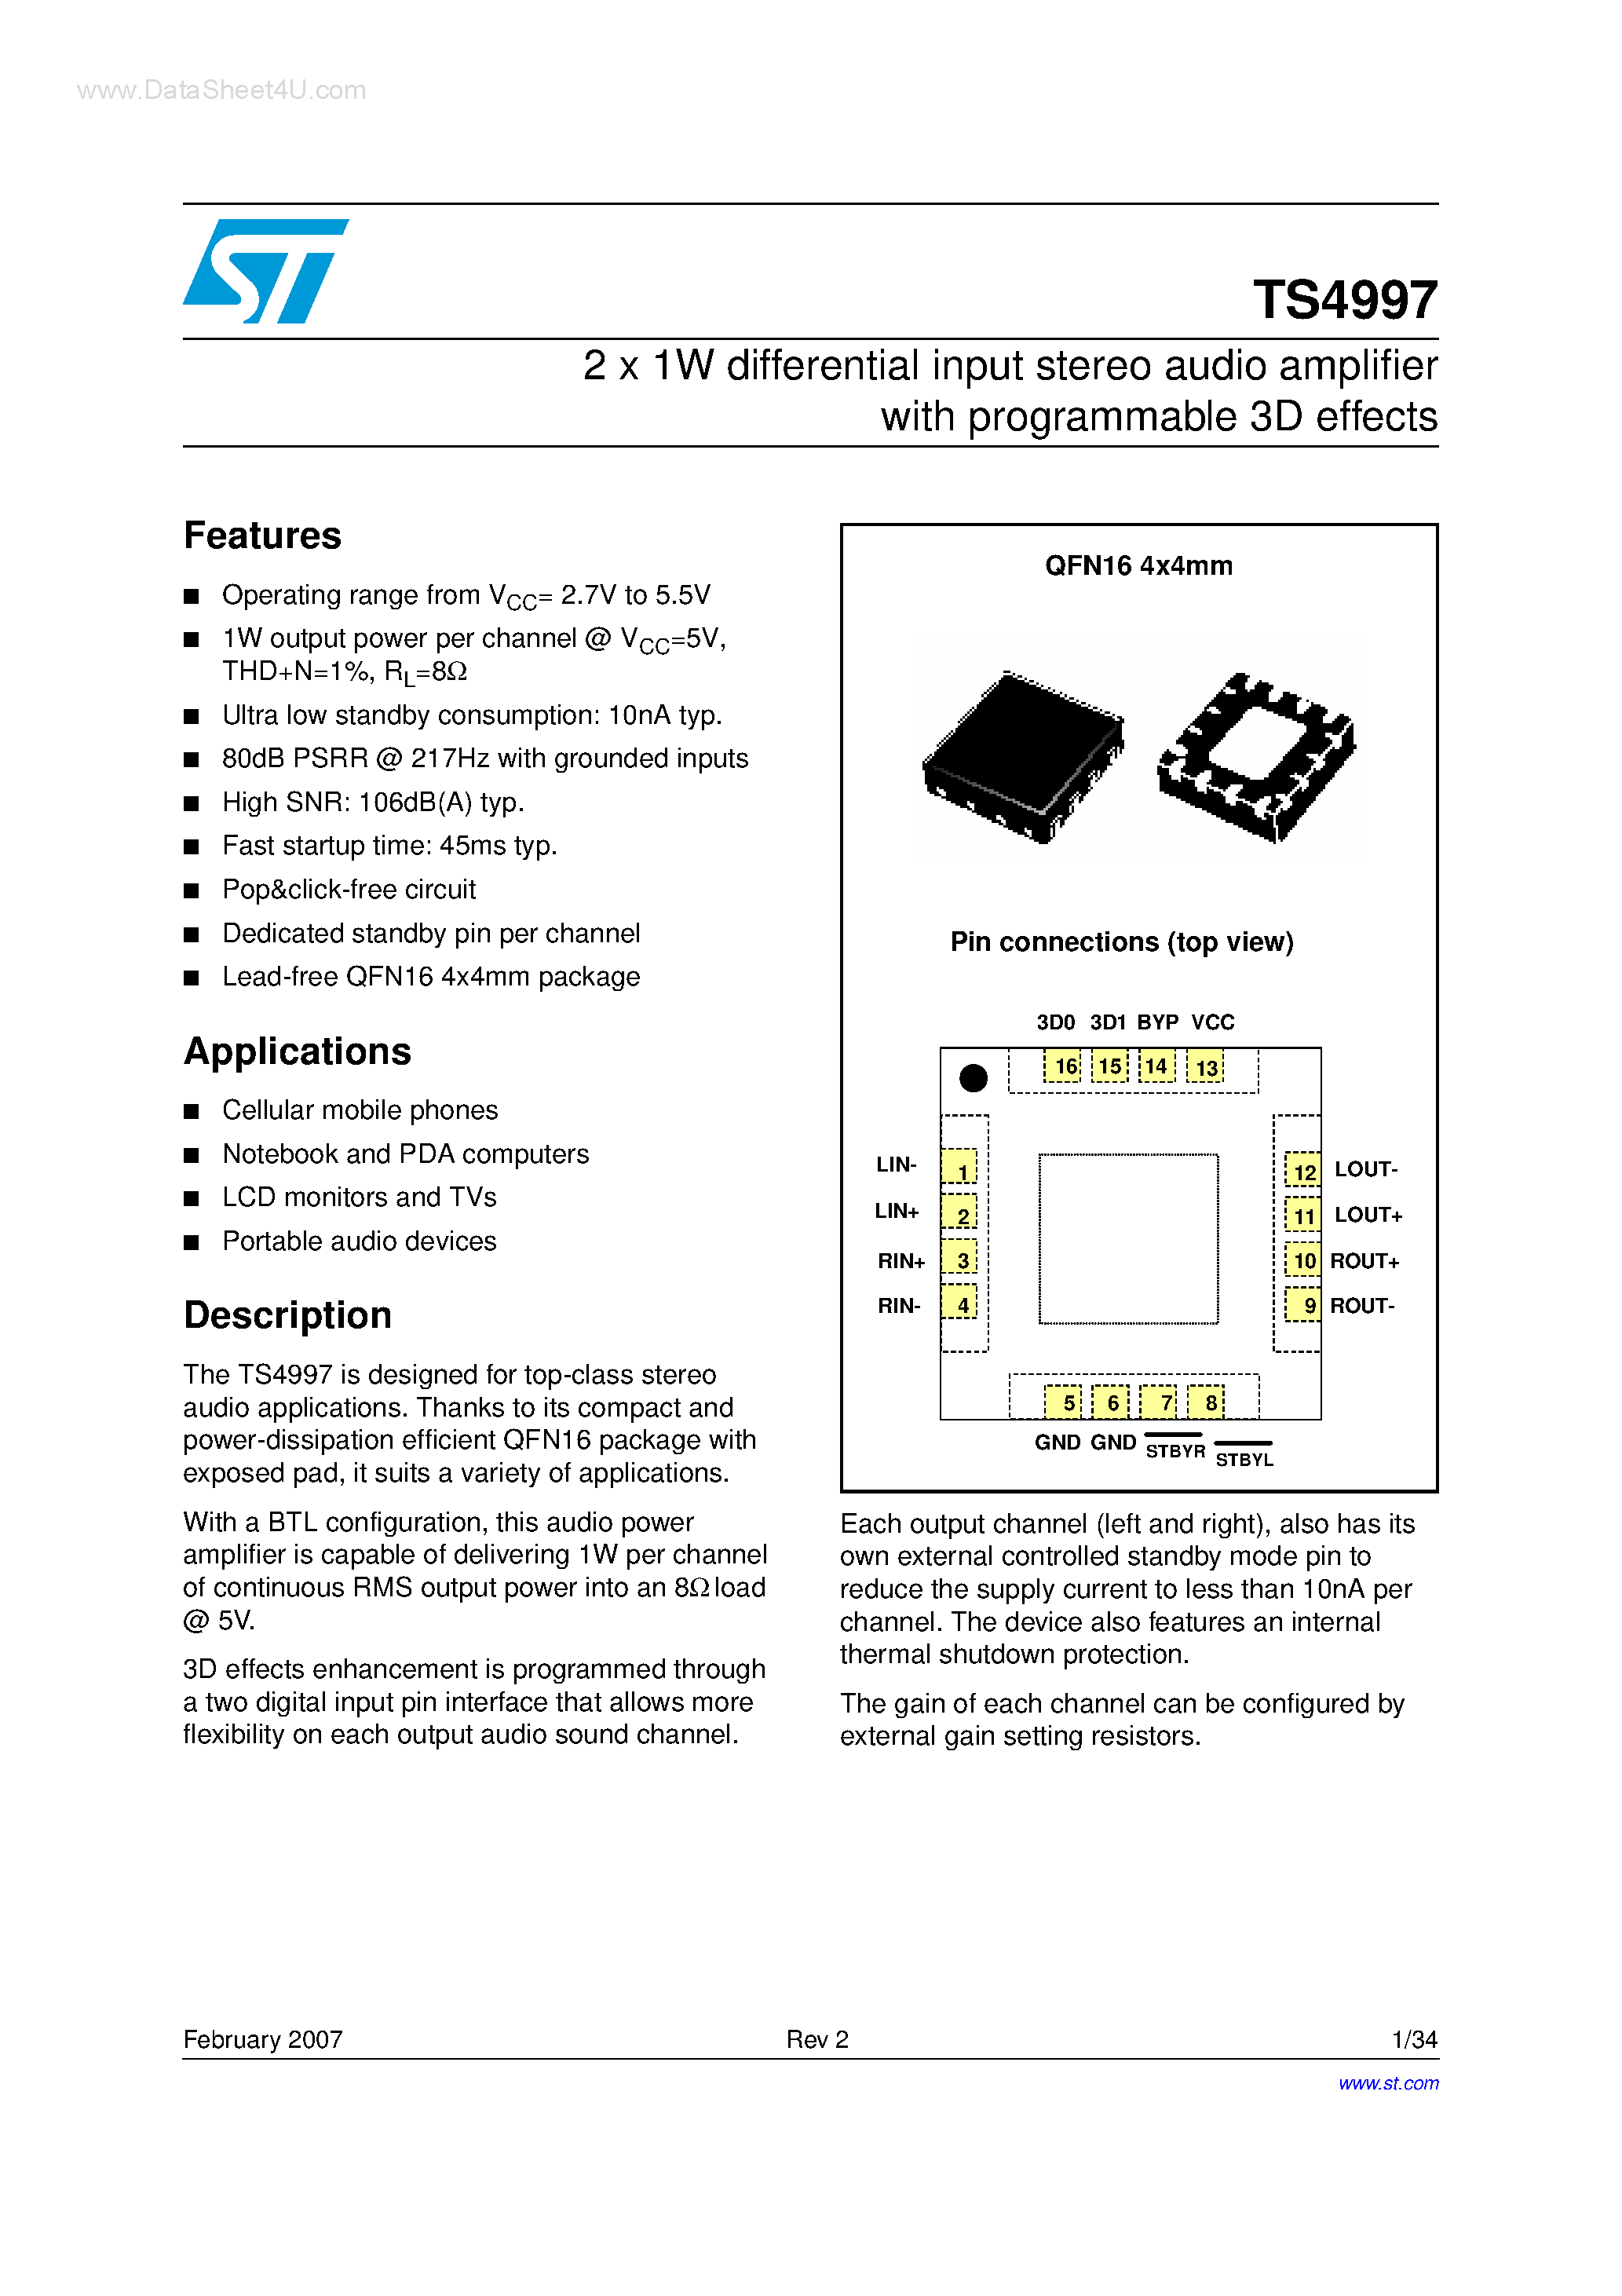 Datasheet TS4997 - 2 x 1W differential input stereo audio amplifier page 1